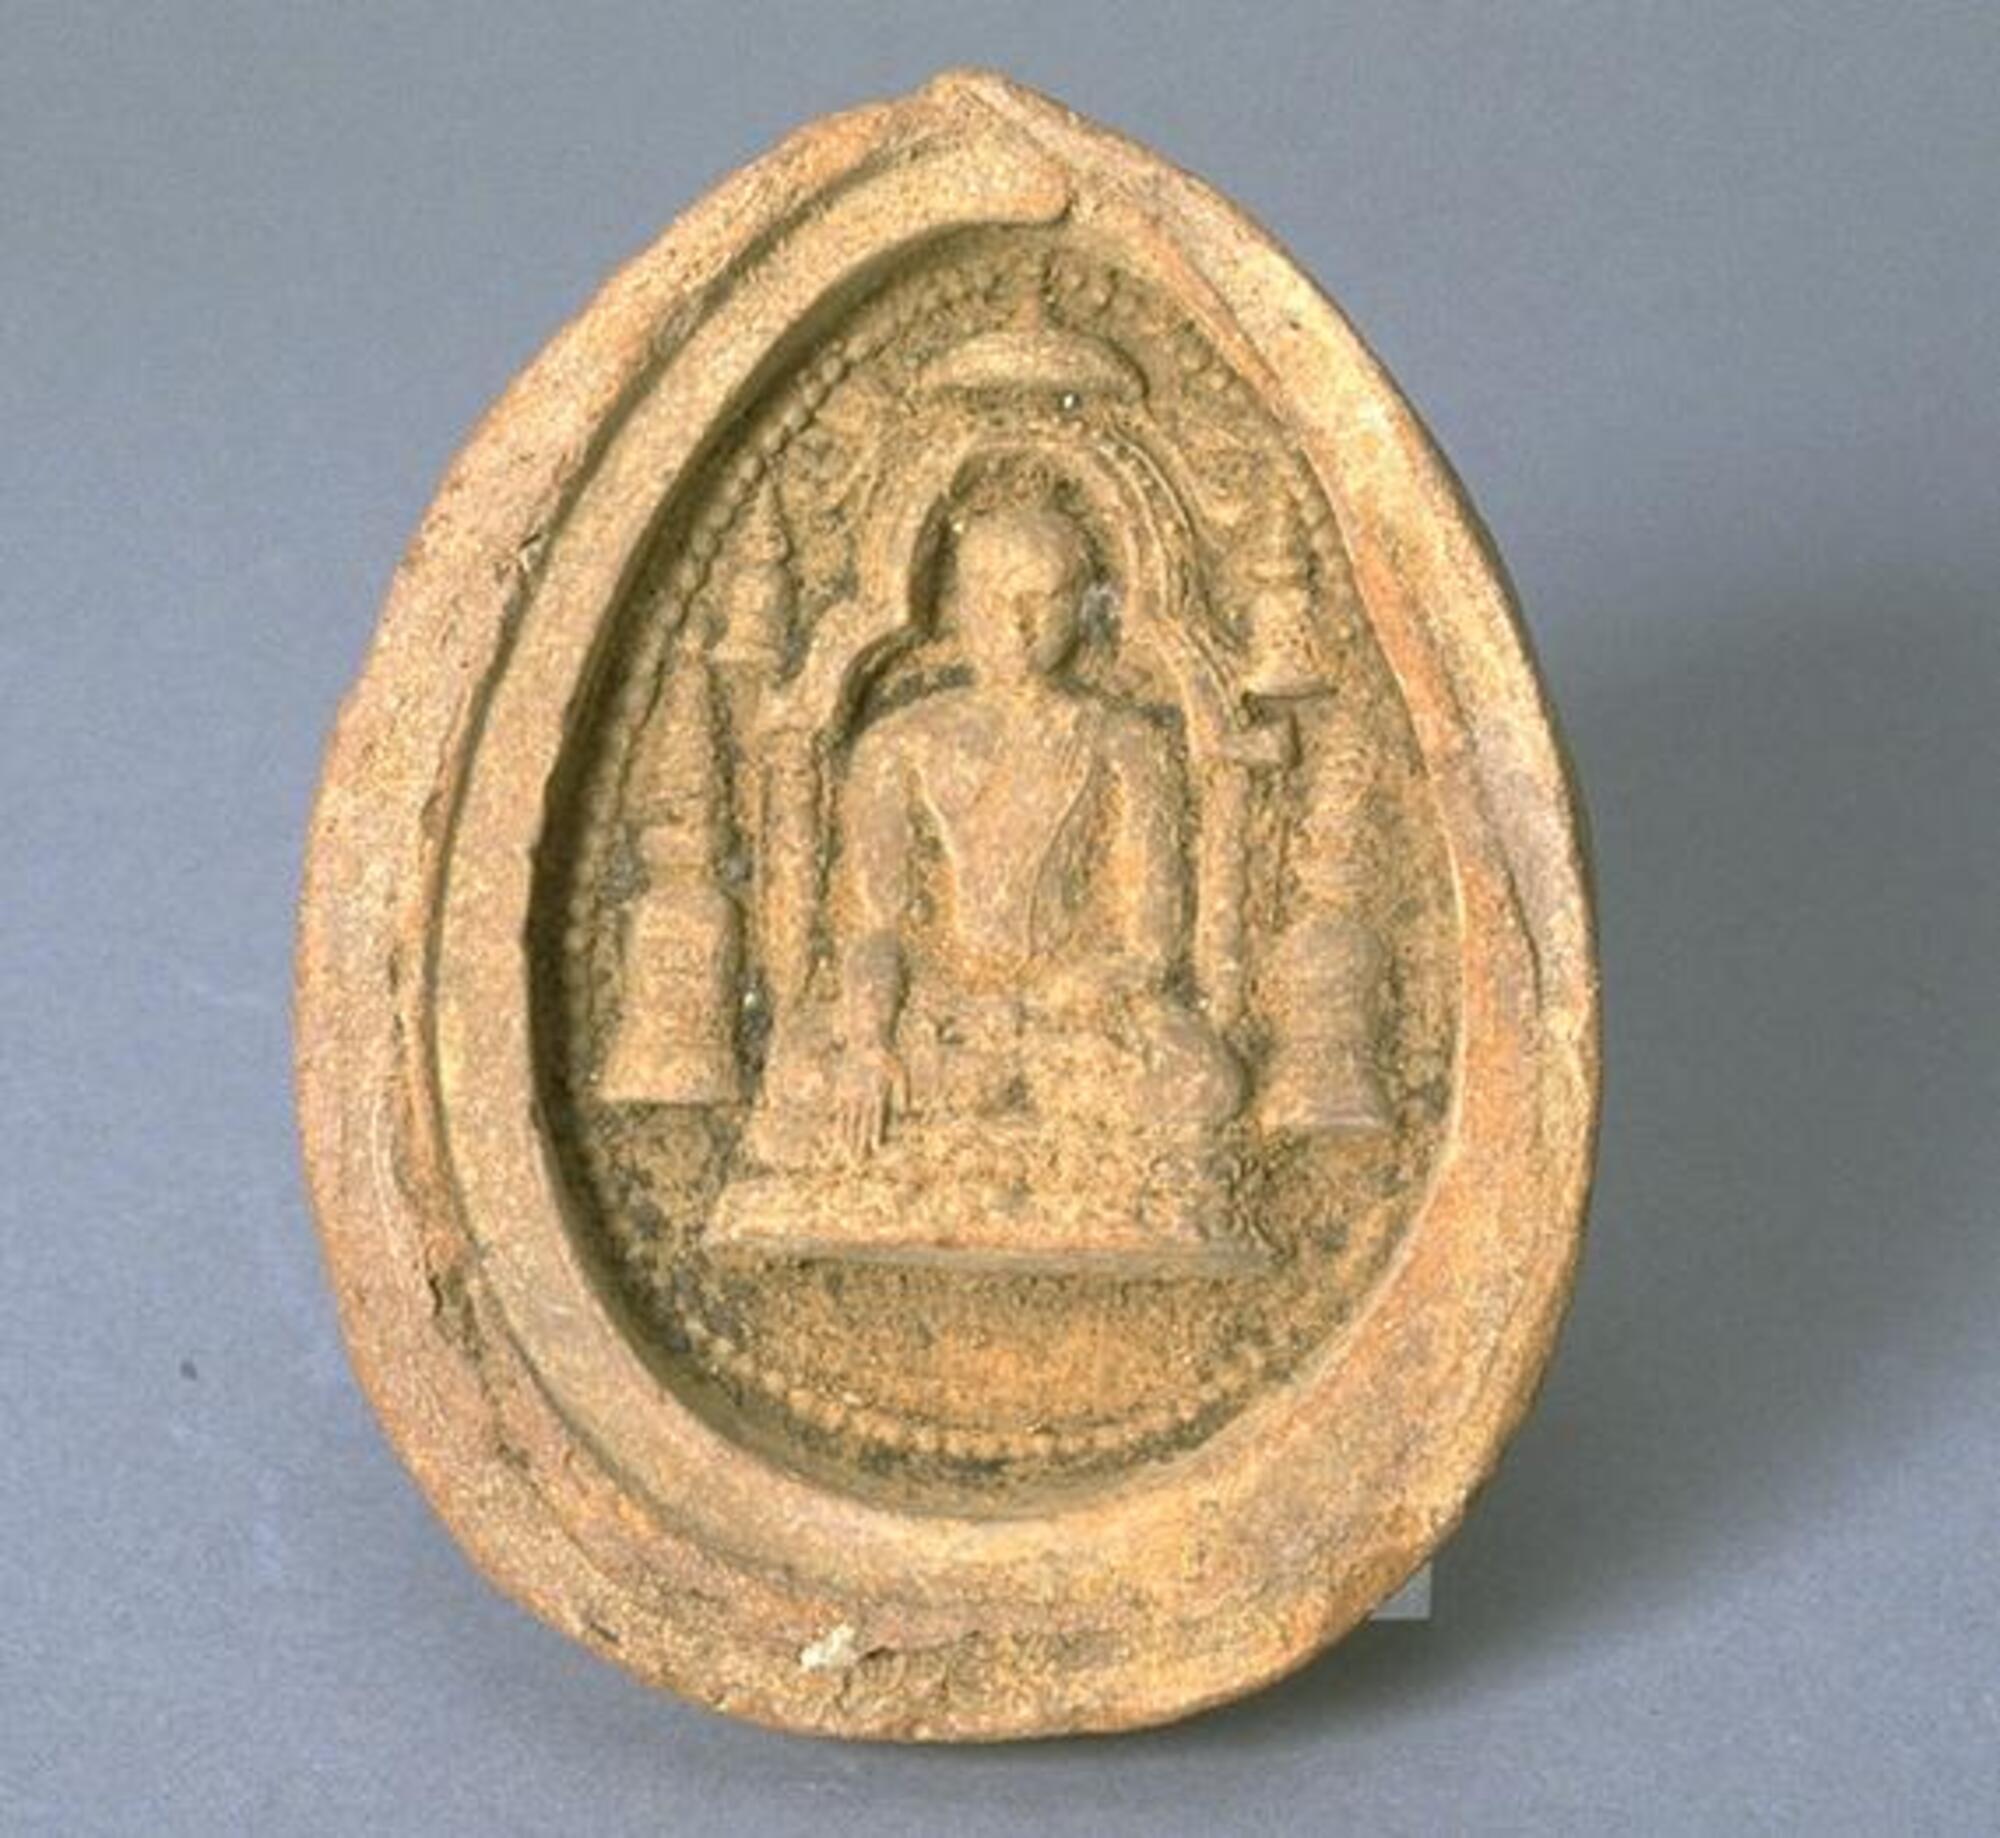 This clay votive plaque depicts the Buddha in the gesture of “calling the earth to witness."  He is shown here surrounded by five stupas, or reliquary monuments.